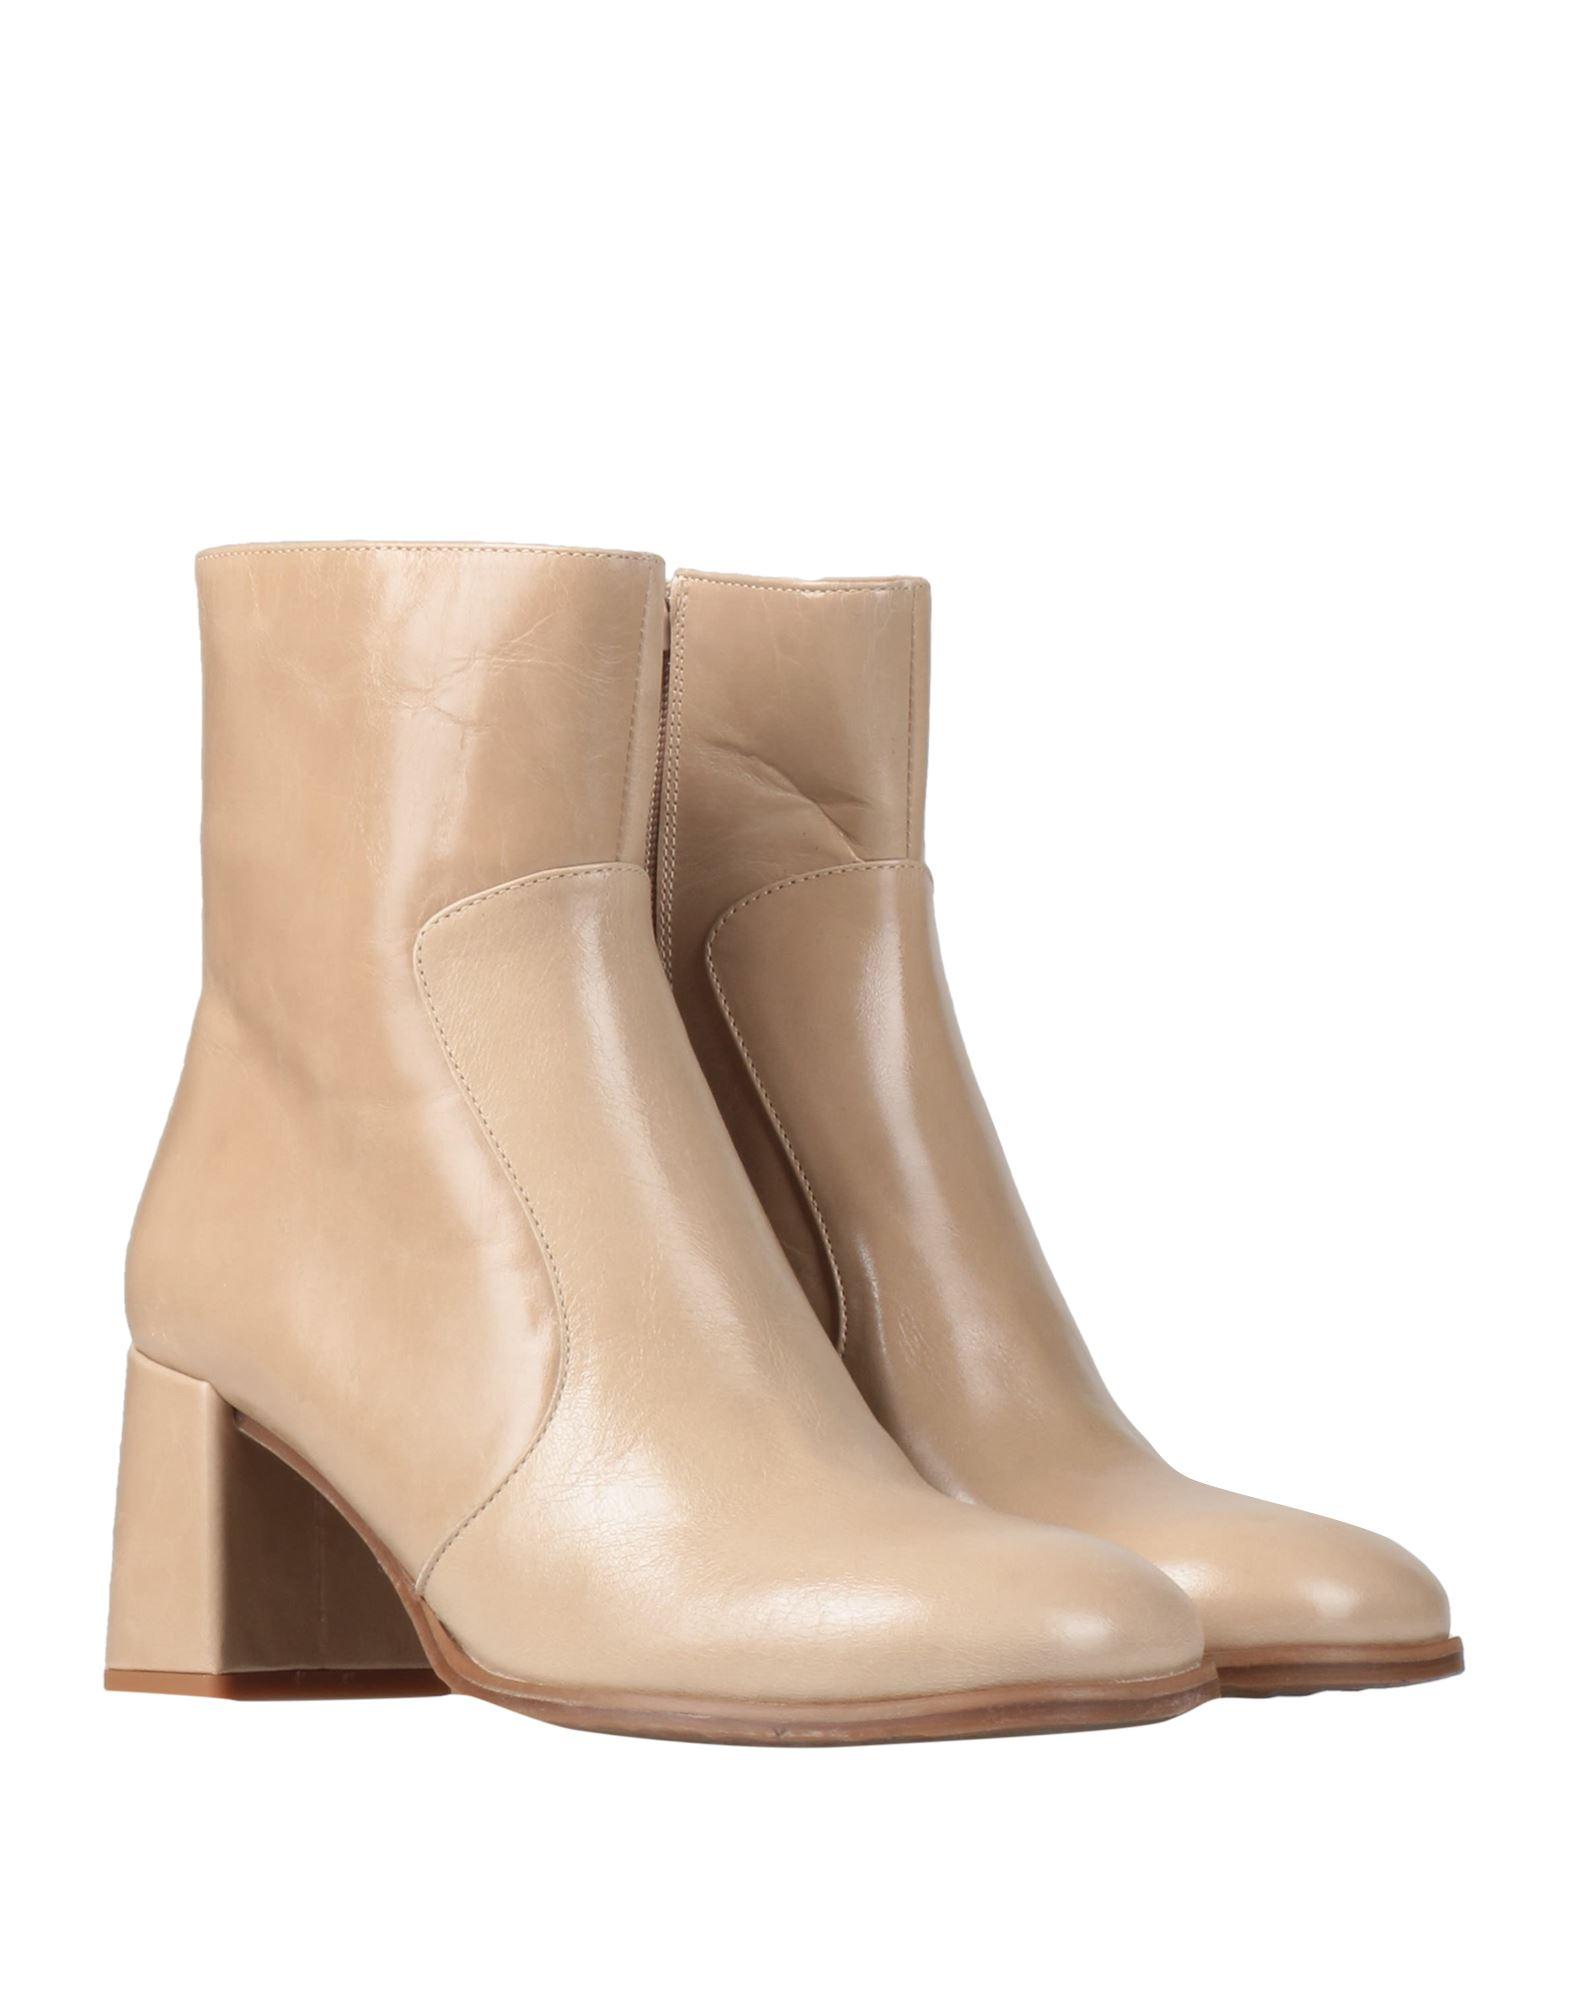 Bruno Premi Ankle Boots in Natural | Lyst